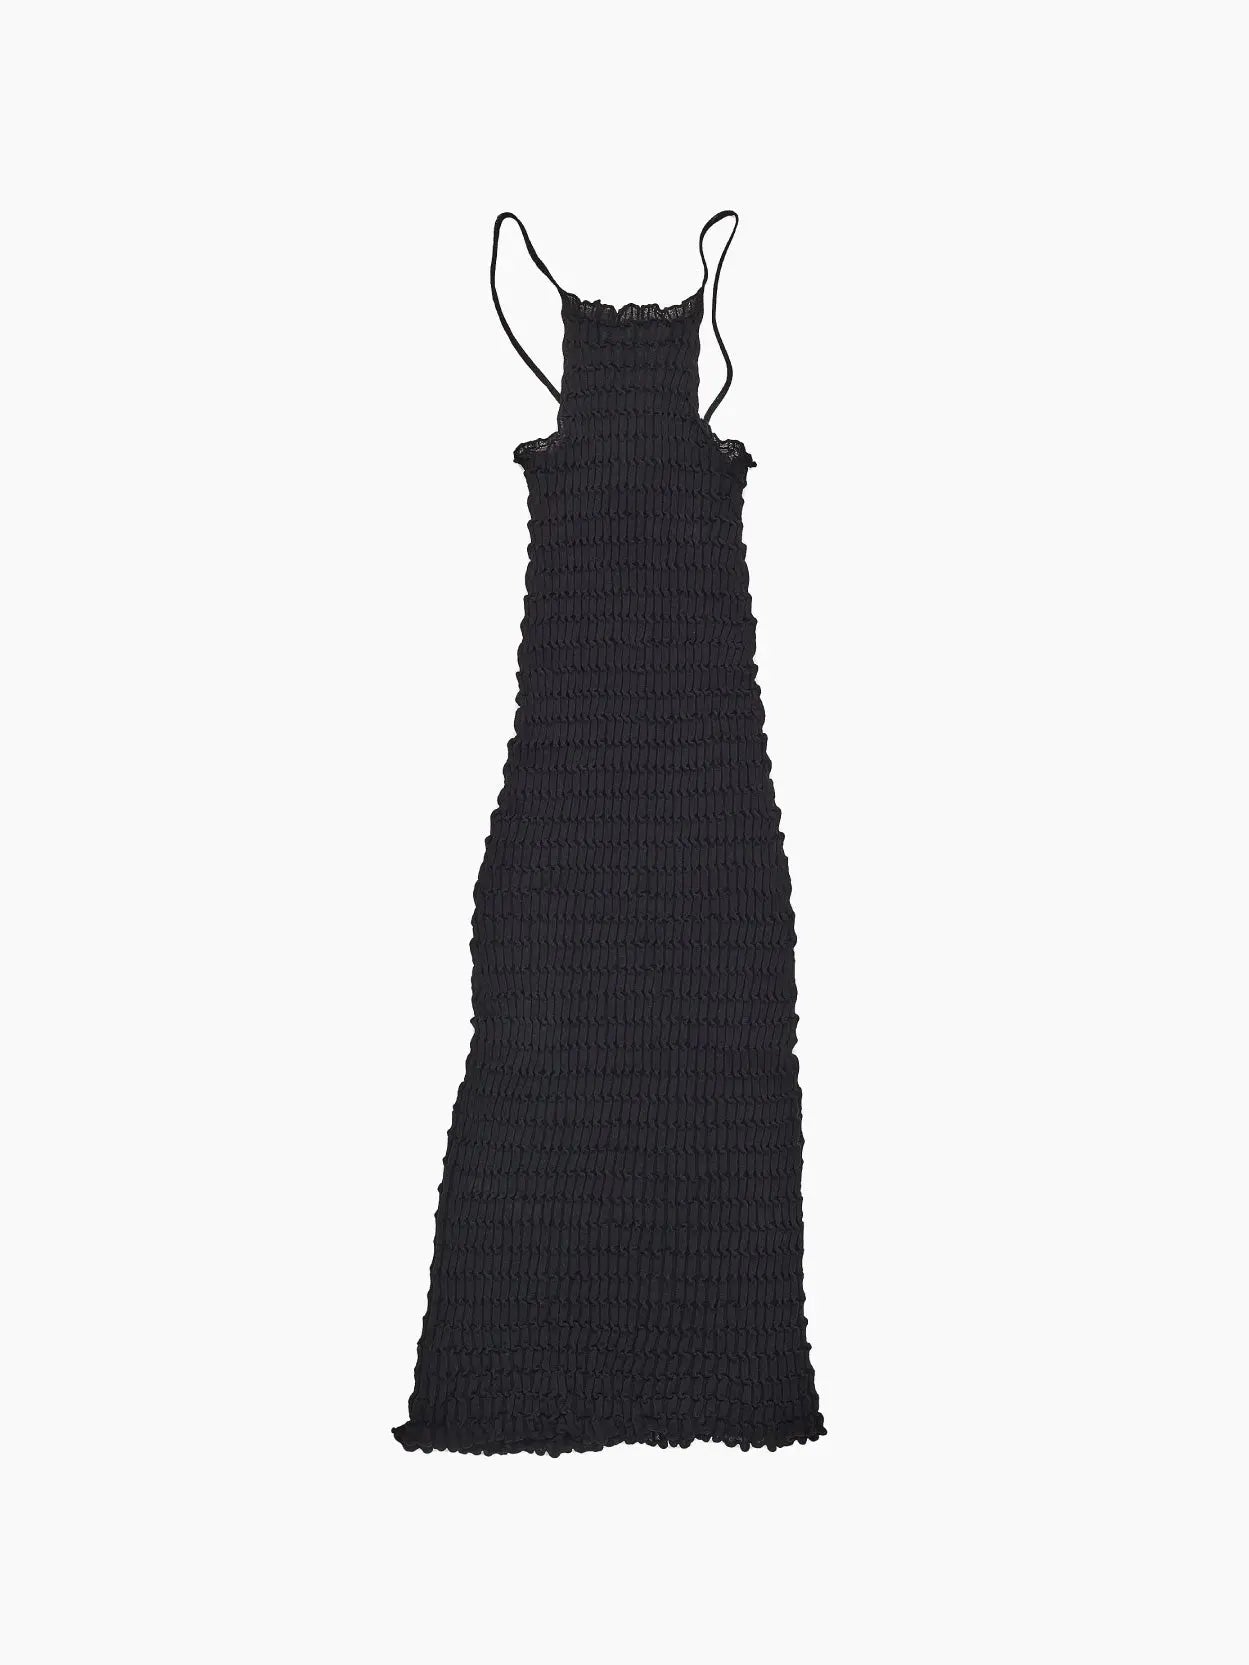 A long, sleeveless black dress with thin shoulder straps is displayed against a plain white background. The Rina Dress Black by Rus, featured at Bassalstore in Barcelona, boasts textured, crinkled fabric and a straight, narrow silhouette.